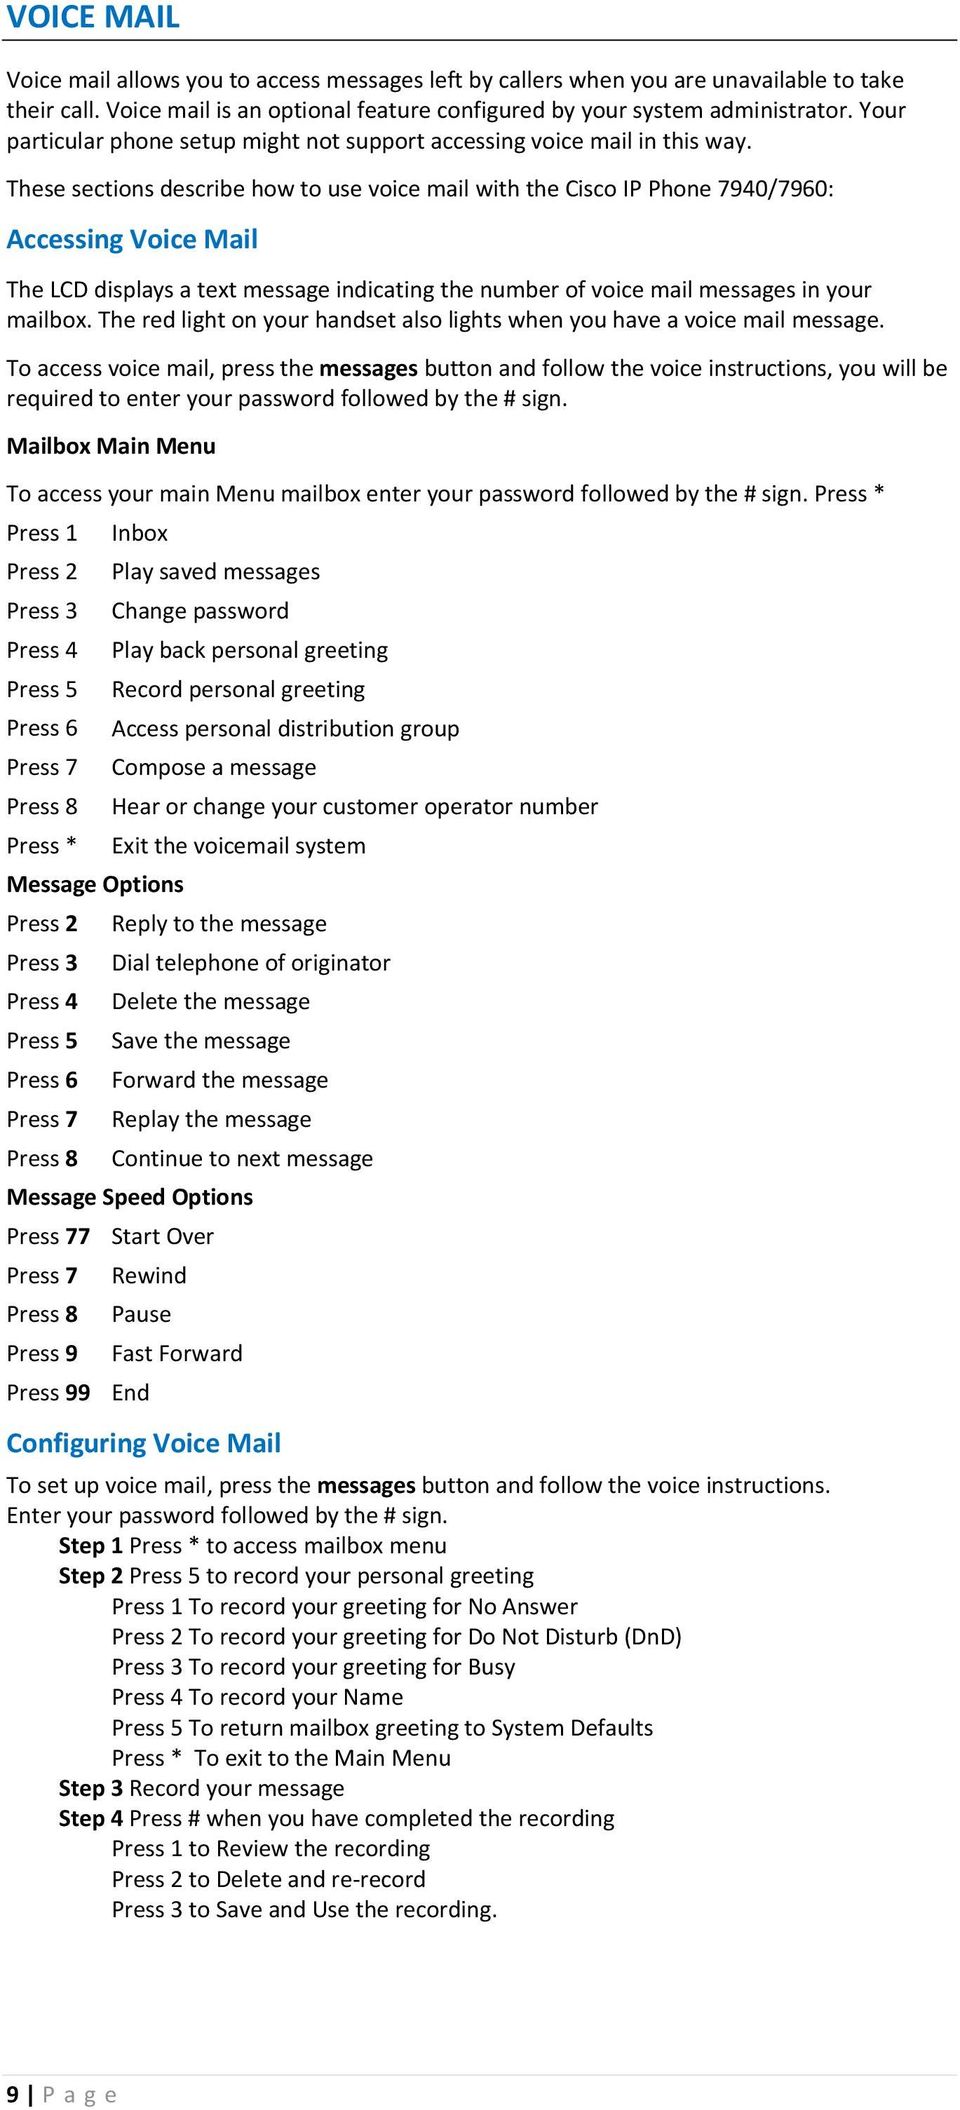 These sections describe how to use voice mail with the Cisco IP Phone 7940/7960: Accessing Voice Mail The LCD displays a text message indicating the number of voice mail messages in your mailbox.